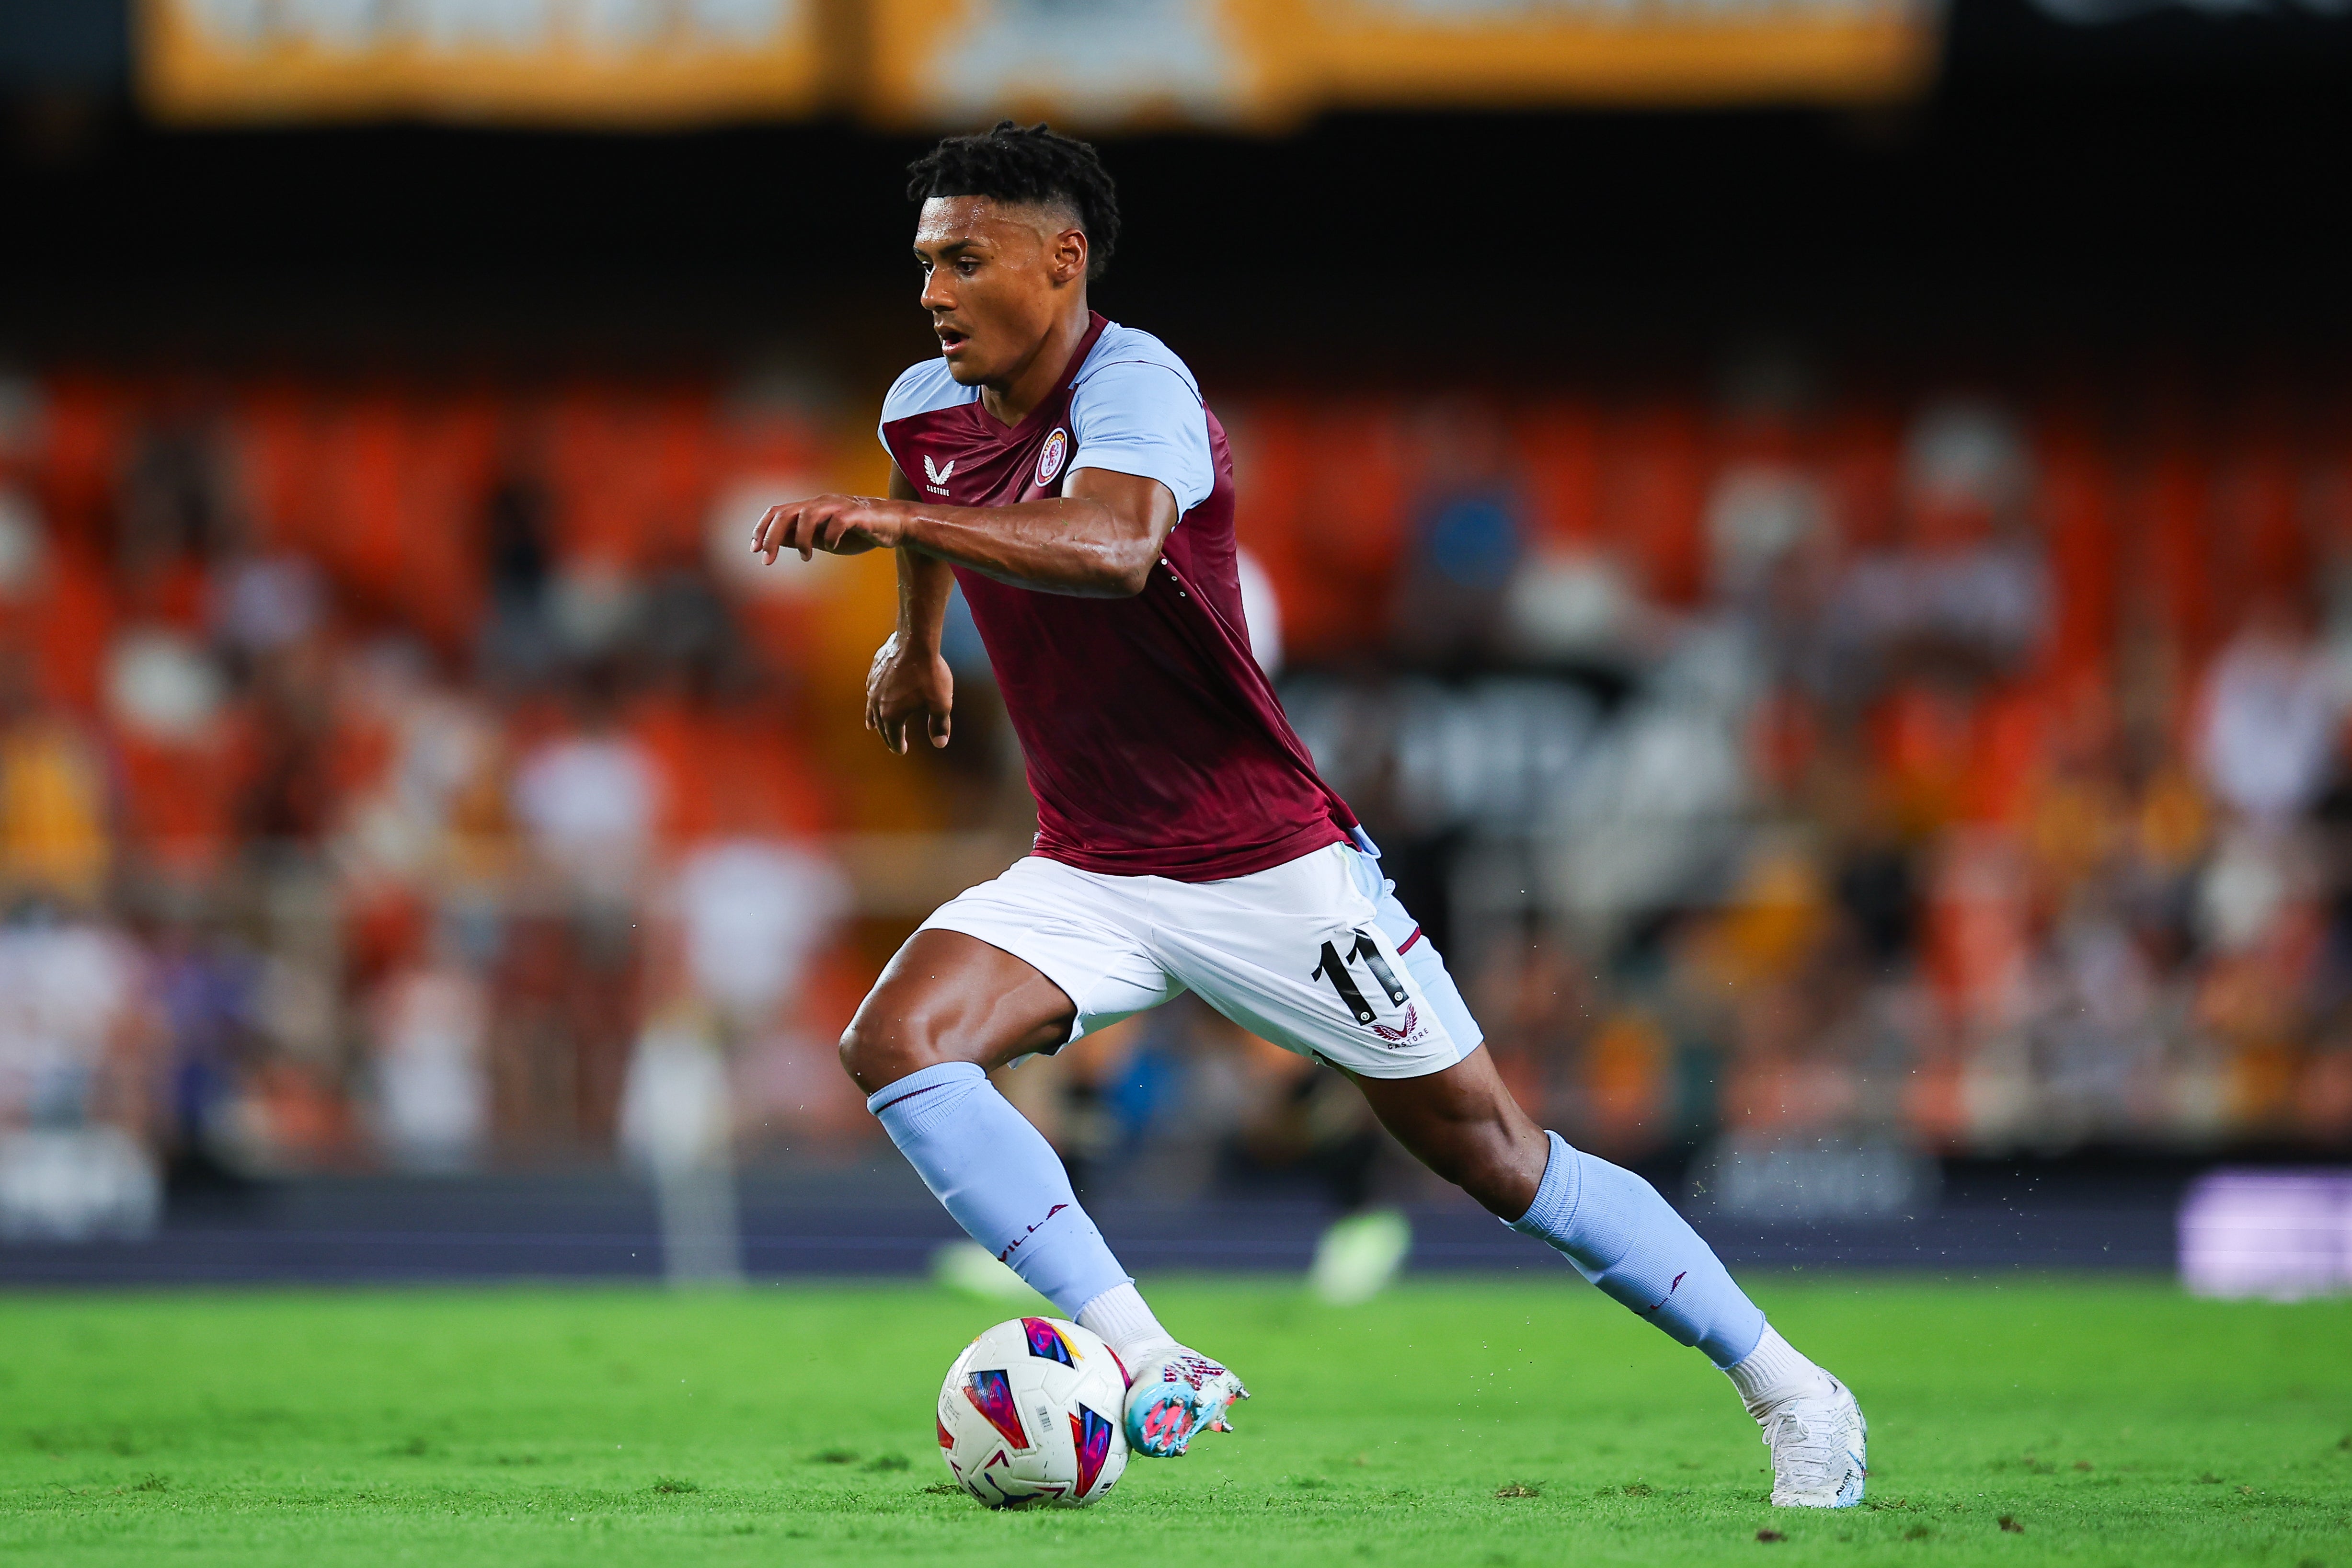 Ollie Watkins offers reliability for FPL owners with his role for Aston Villa